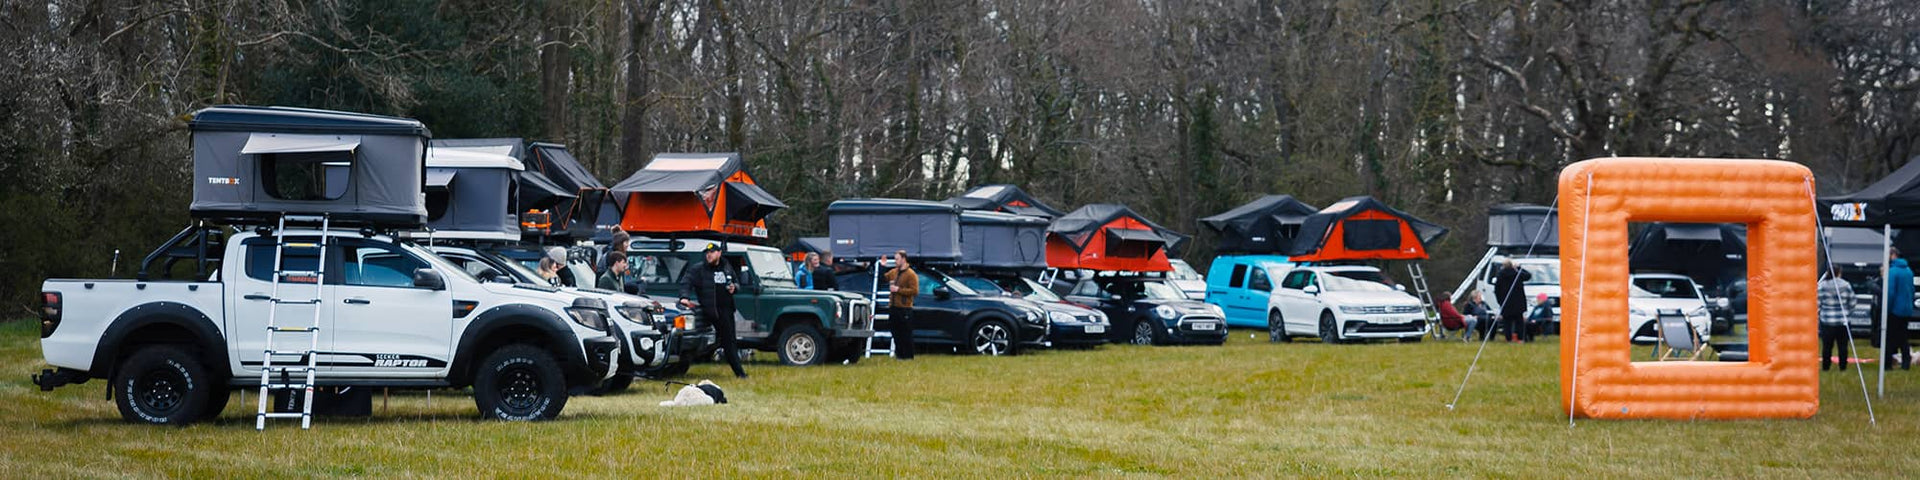 A camping field with many roof tents installed on different cars, owned by TentBox Ambassadors